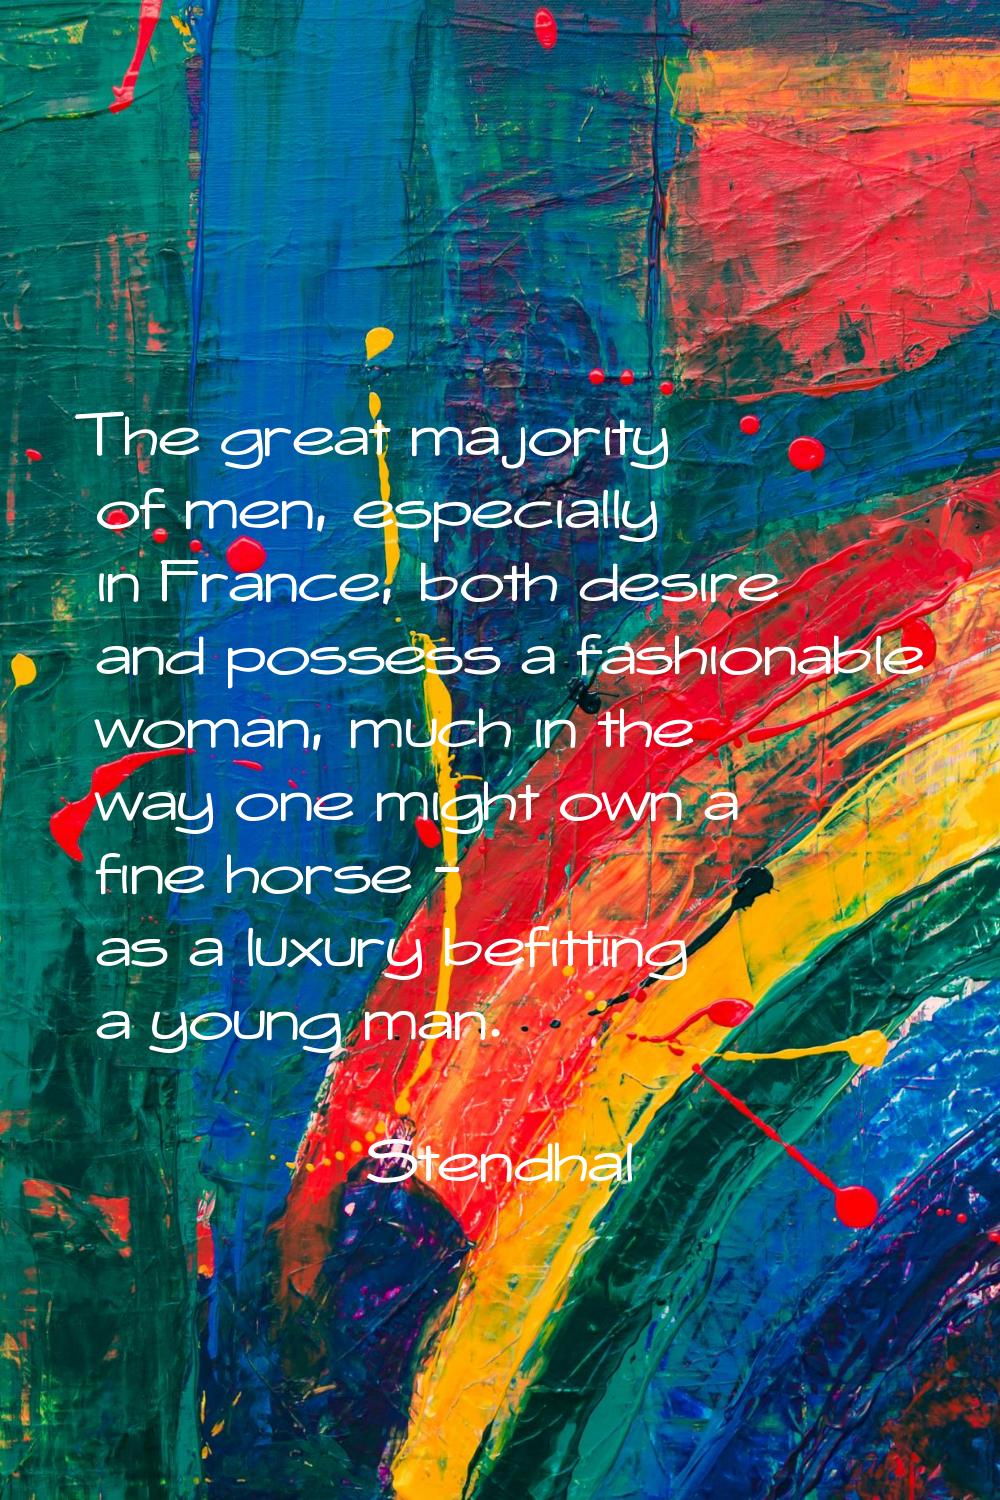 The great majority of men, especially in France, both desire and possess a fashionable woman, much 